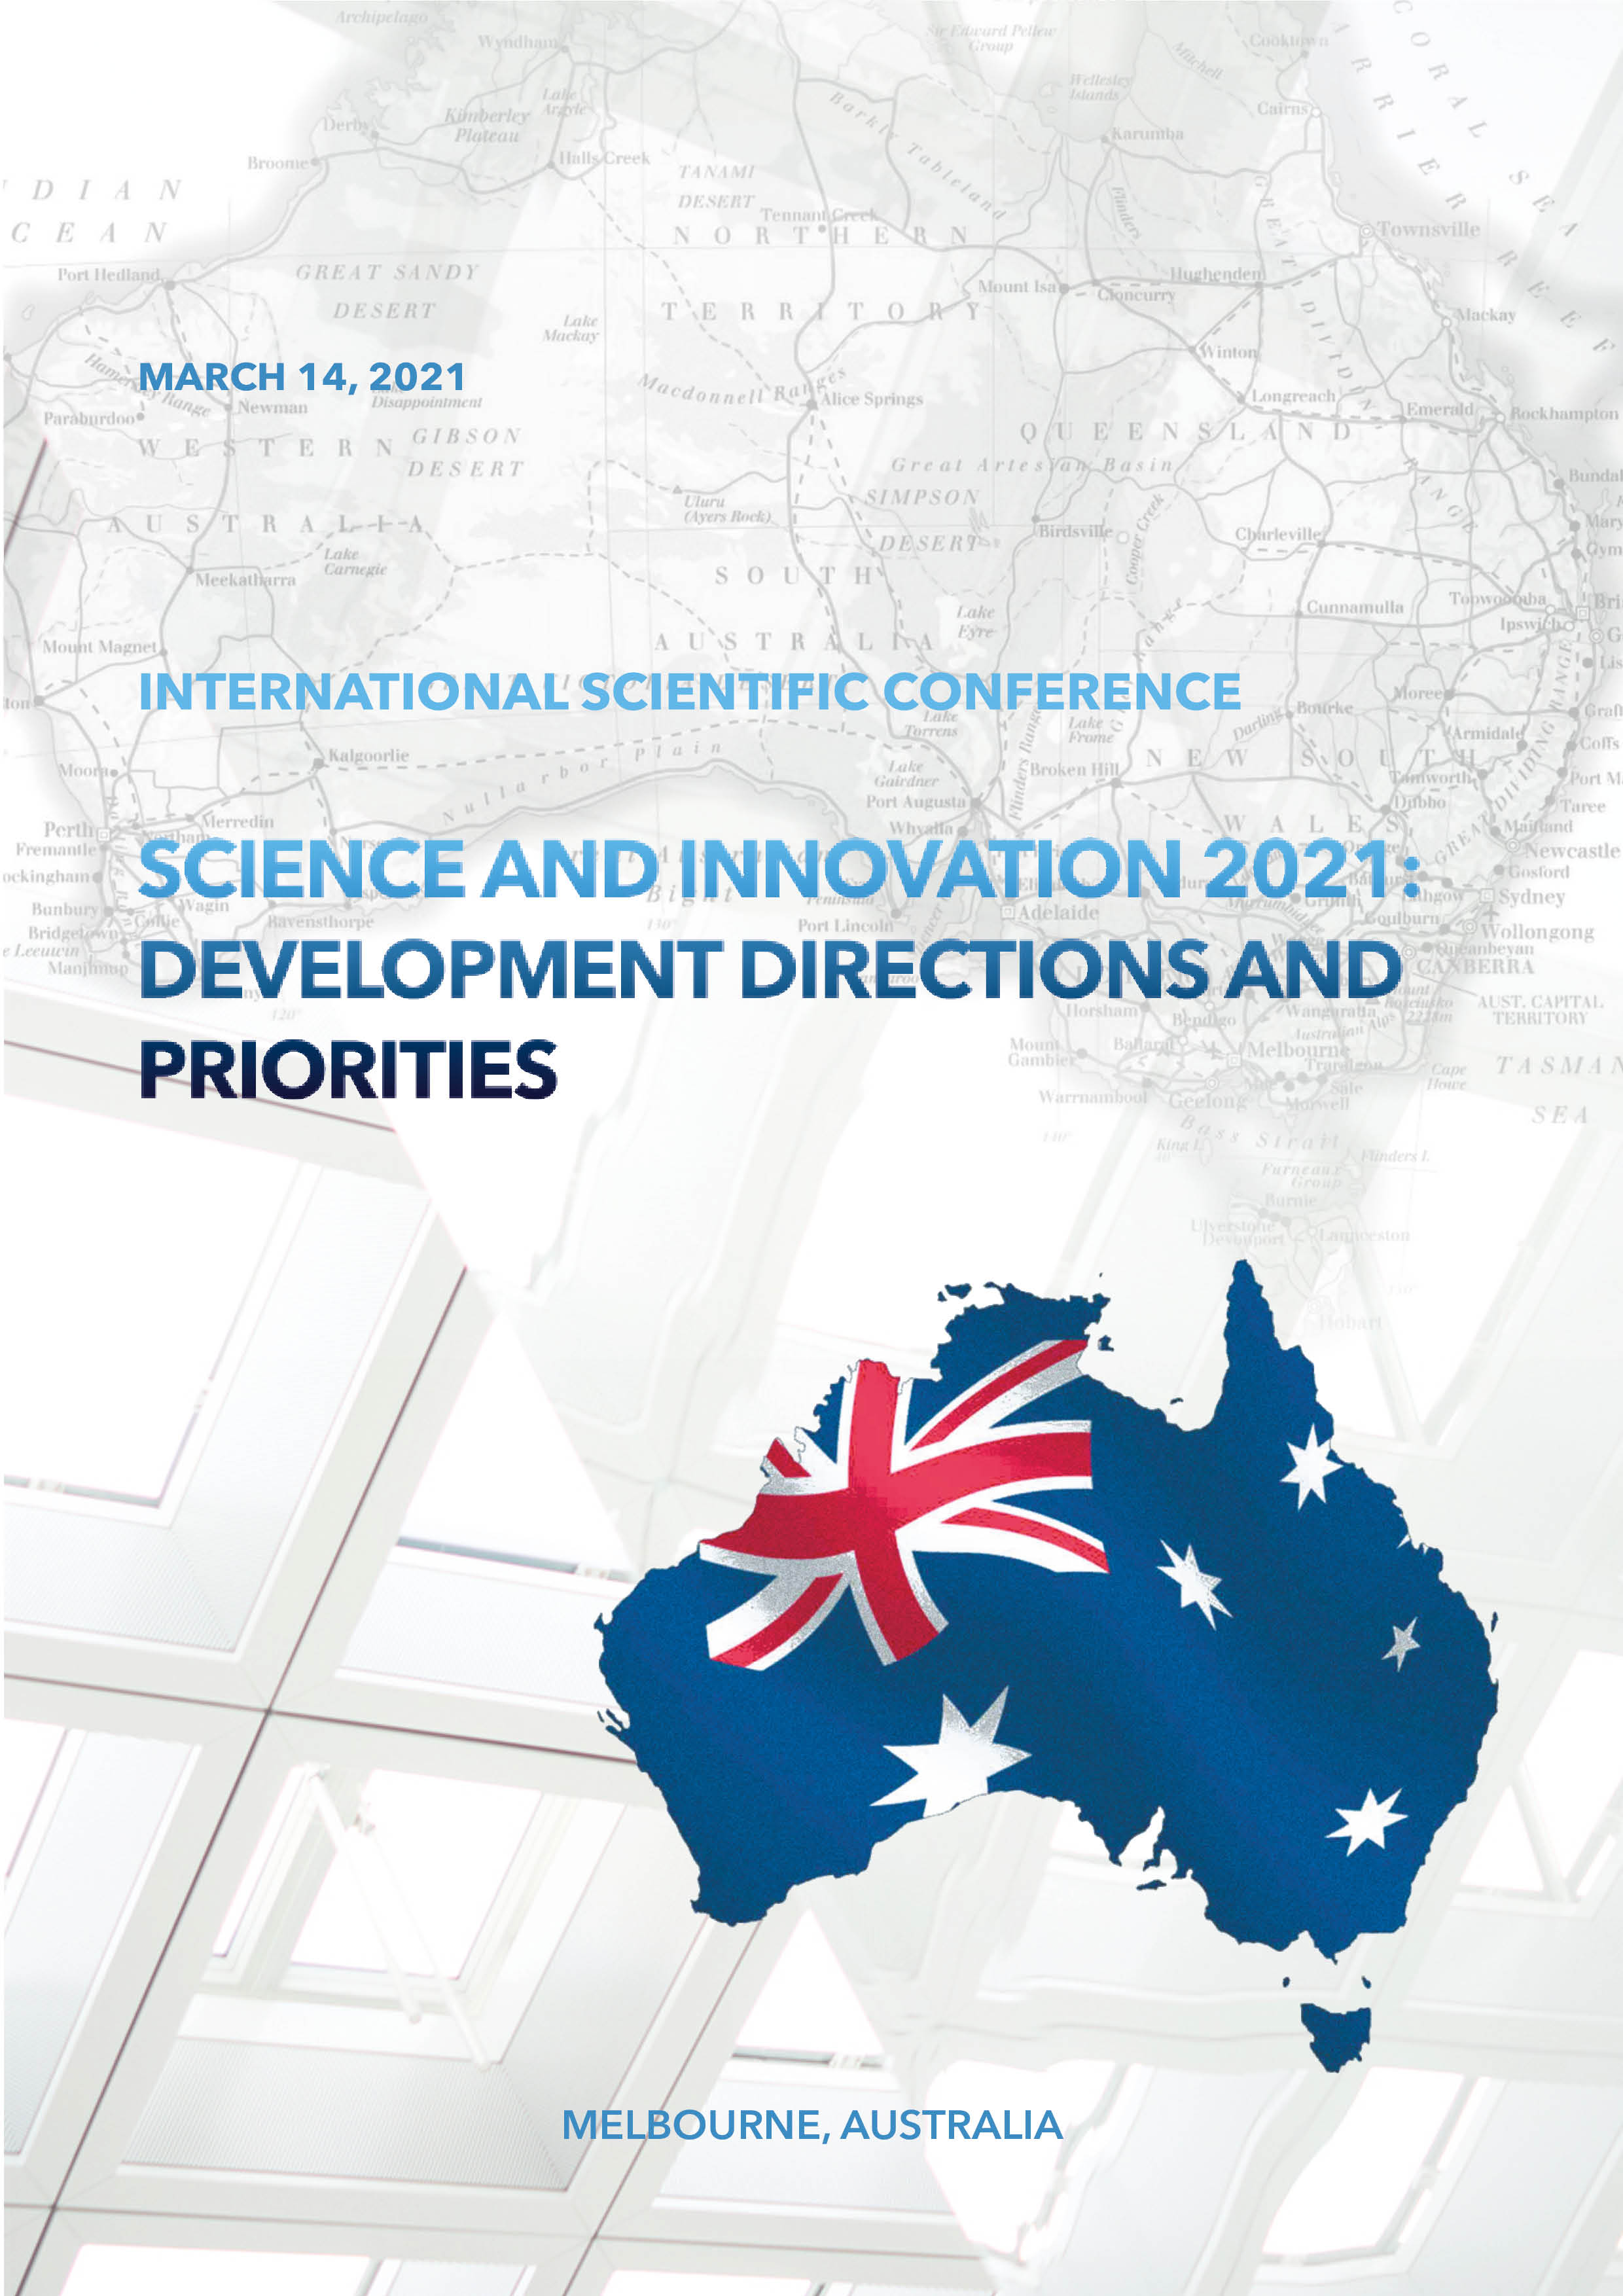                         SCIENCE AND INNOVATION 2021: DEVELOPMENT DIRECTIONS AND PRIORITIES. Vol.II
            